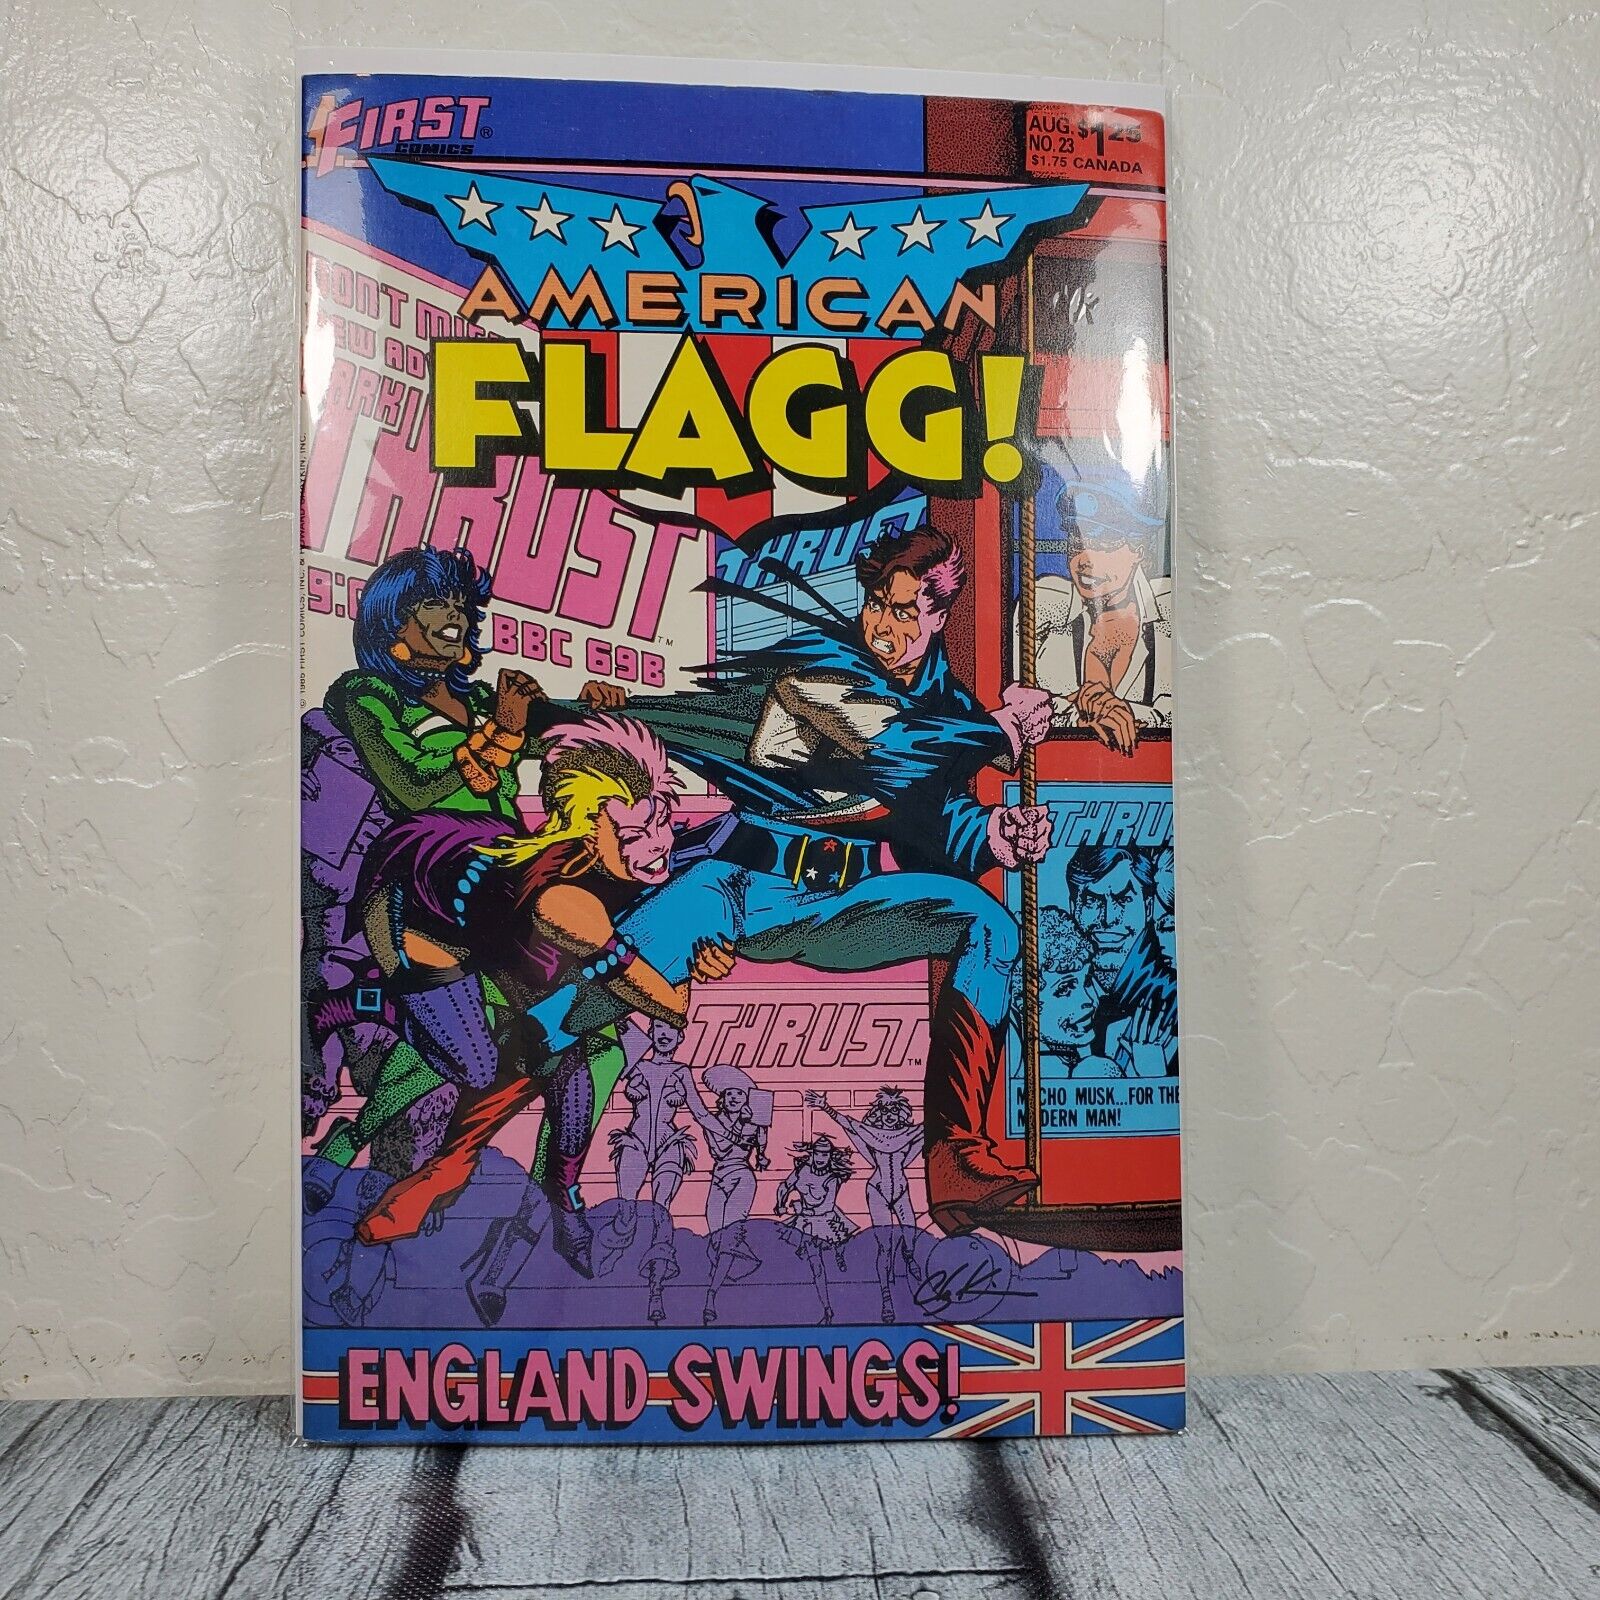 First Comics American Flagg #23 Vol. 1 1985 Vintage Comic Book Sleeved Boarded